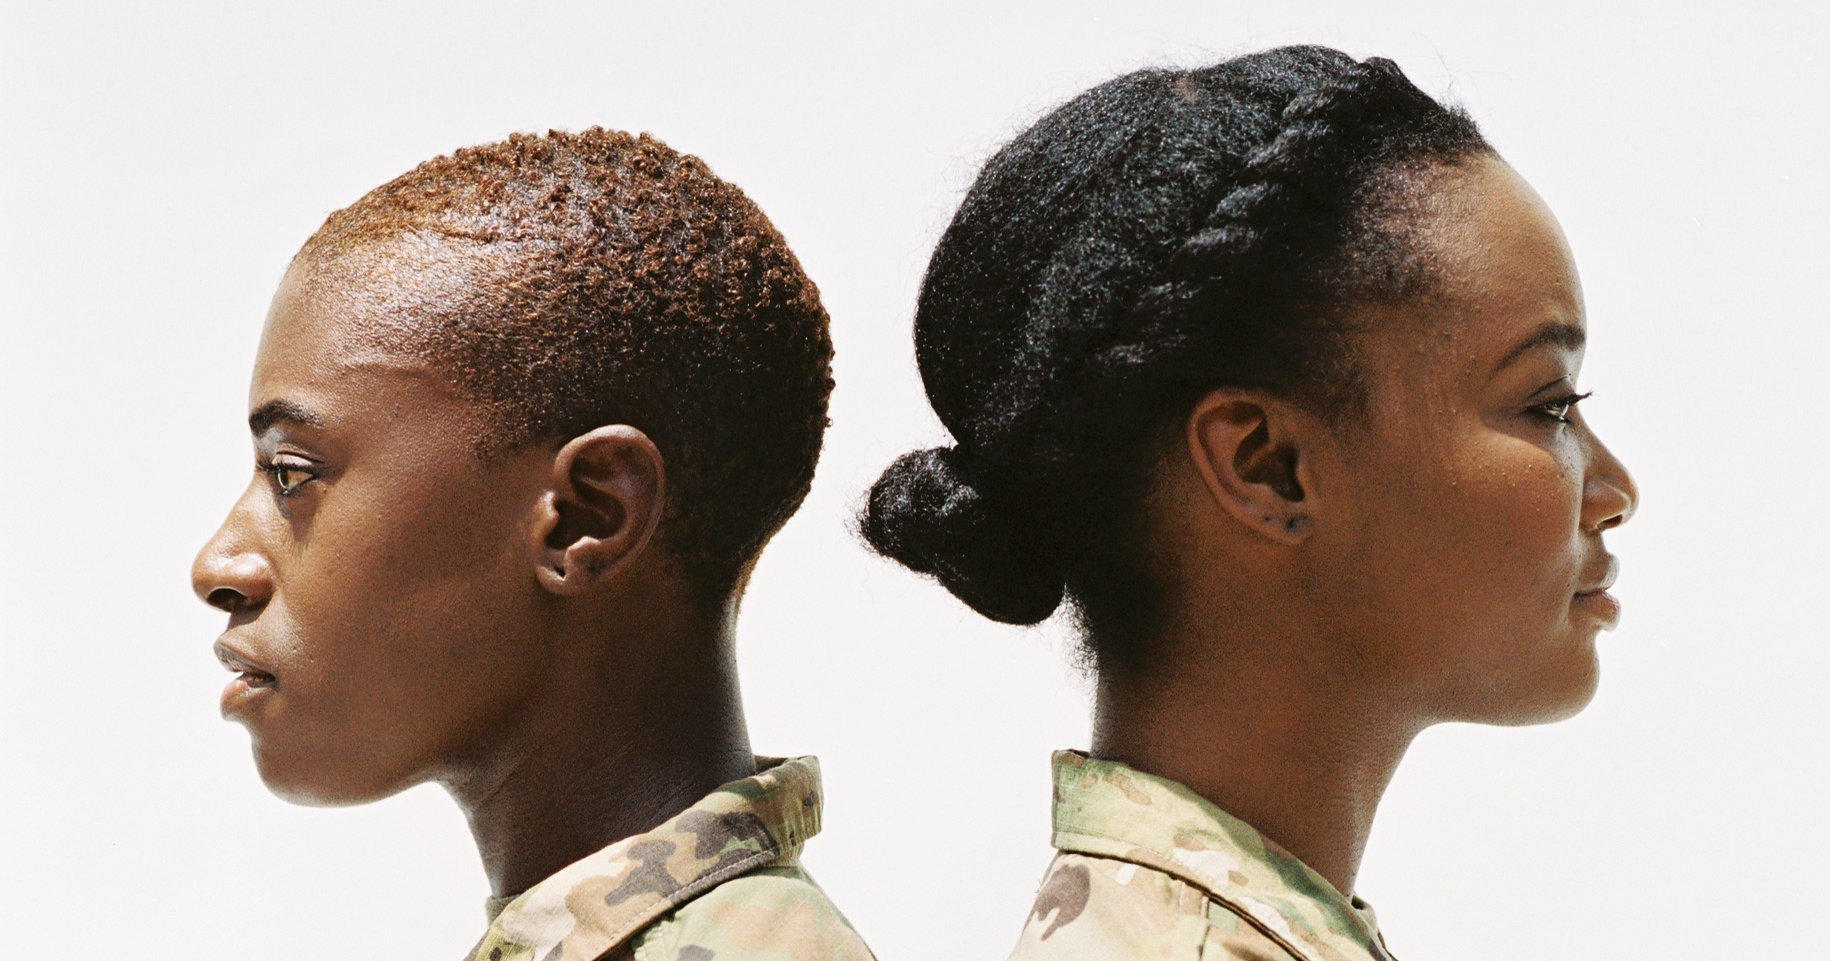 Female Authorized Hairstyles Army
 These Inspiring Black Servicewomen Are Embracing Natural